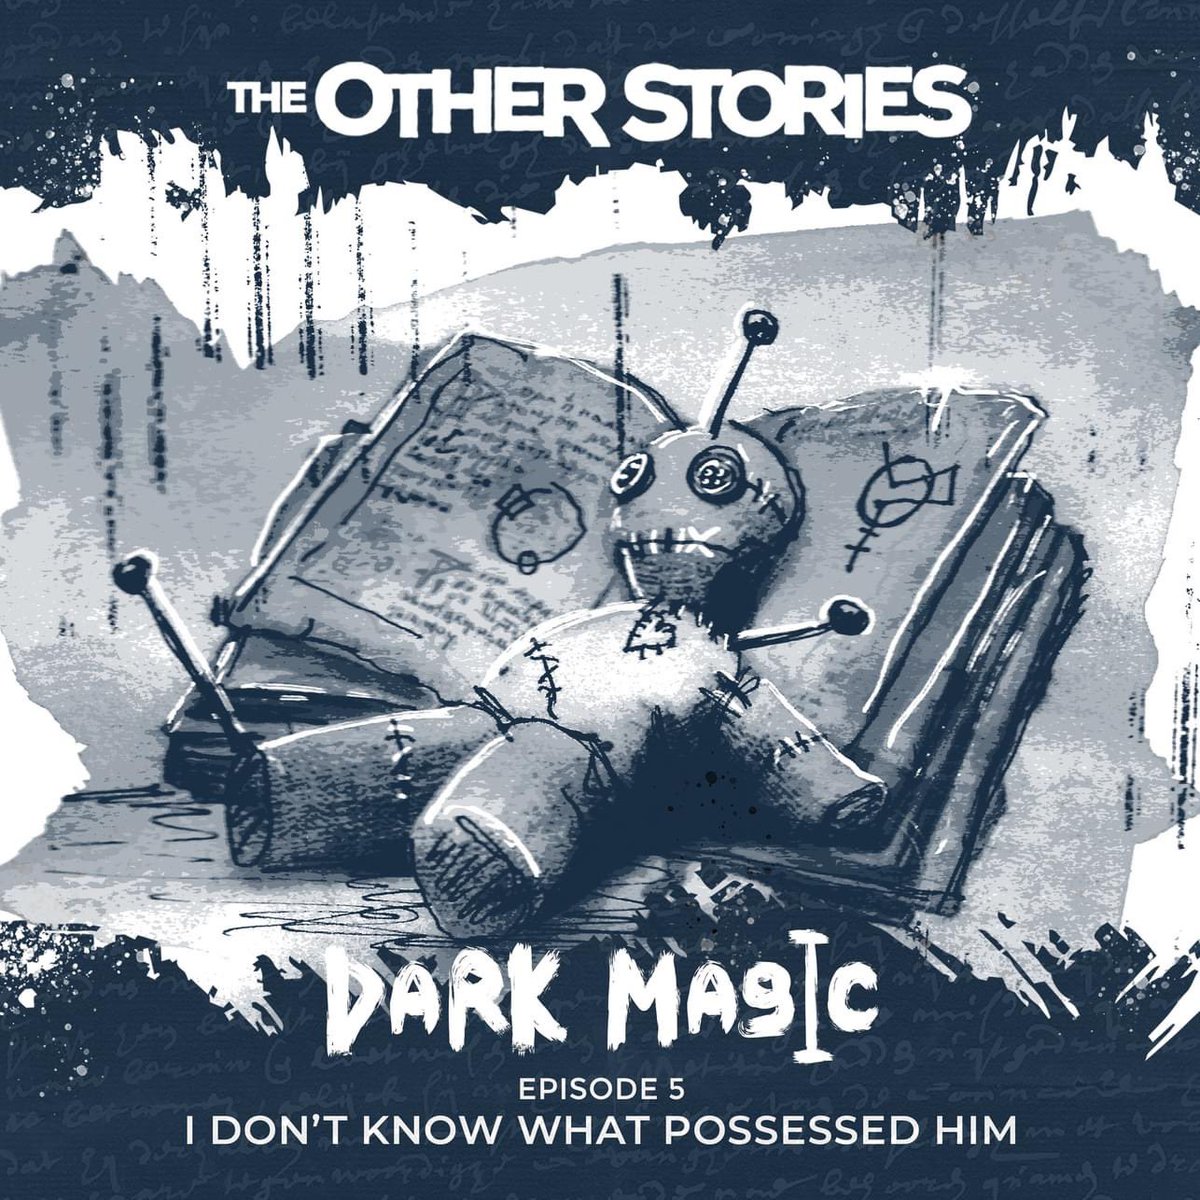 #TheOtherStories | Dark Magic | Episode 5 'I Don’t Know What Possessed Him' is written by @MikeGarley, narrated by Shara Jahnke and edited by @duncanmuggleton. Artwork - @CarrionHouse | Music - @duncanmuggleton & @thomrobsonmusic theotherstories.net